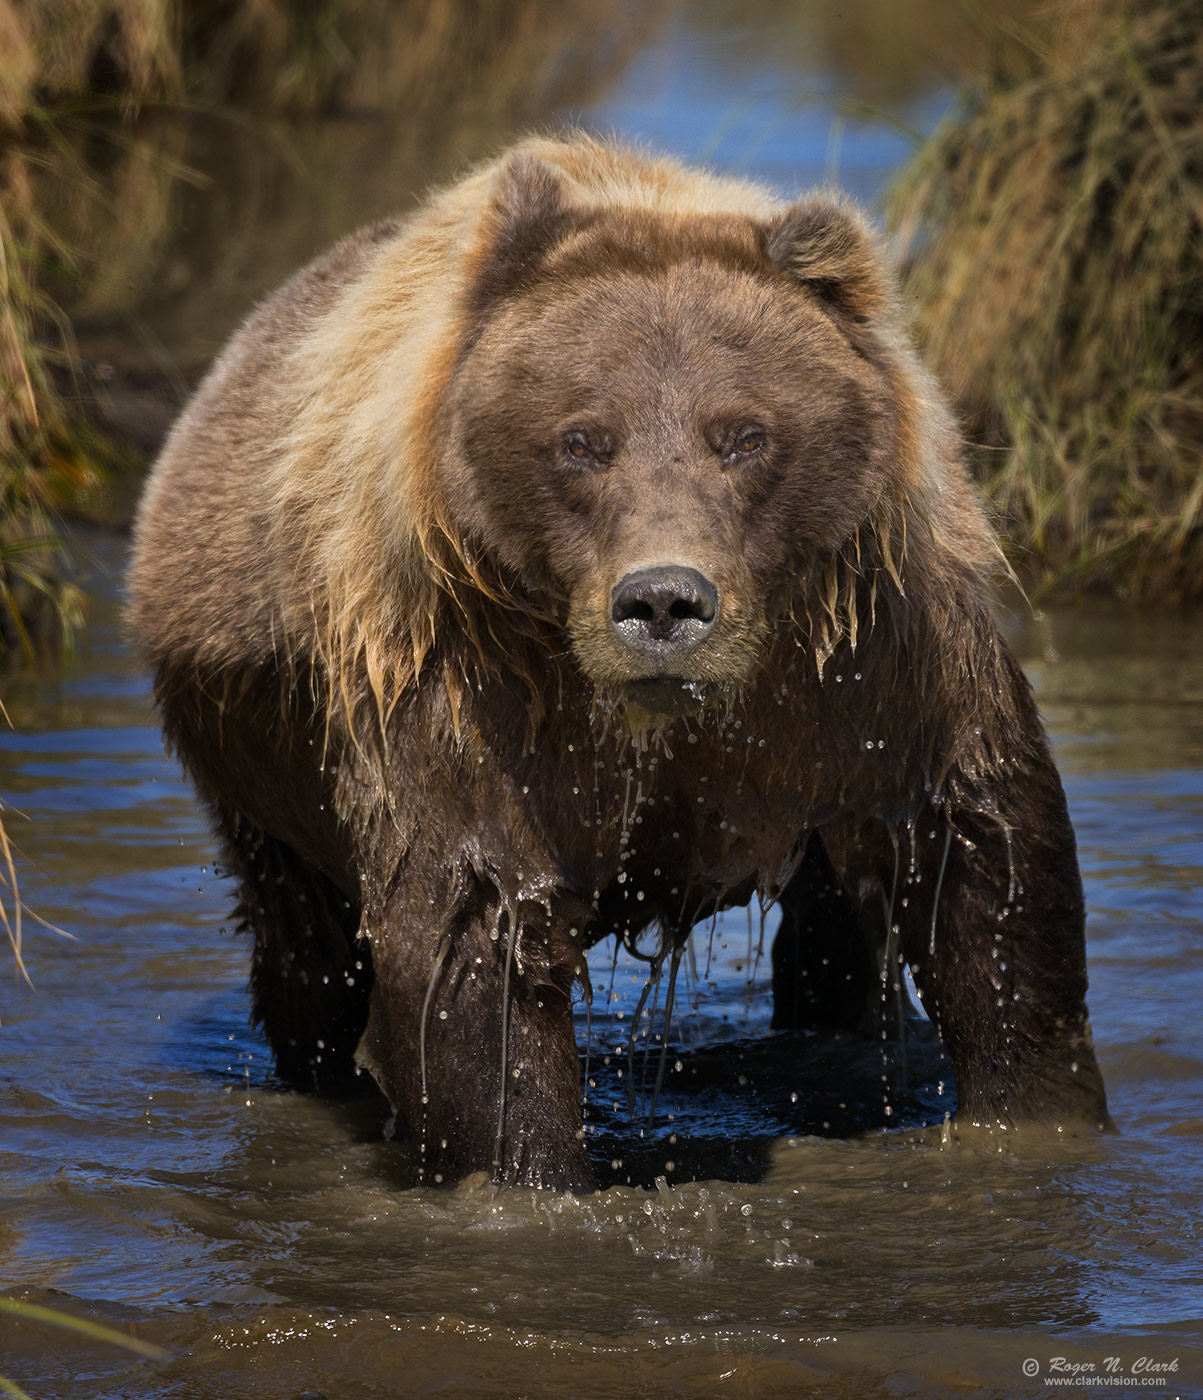 image brown-bear-female-in-water-c08-22-2023-4C3A1232.d-c1-1400s.jpg is Copyrighted by Roger N. Clark, www.clarkvision.com